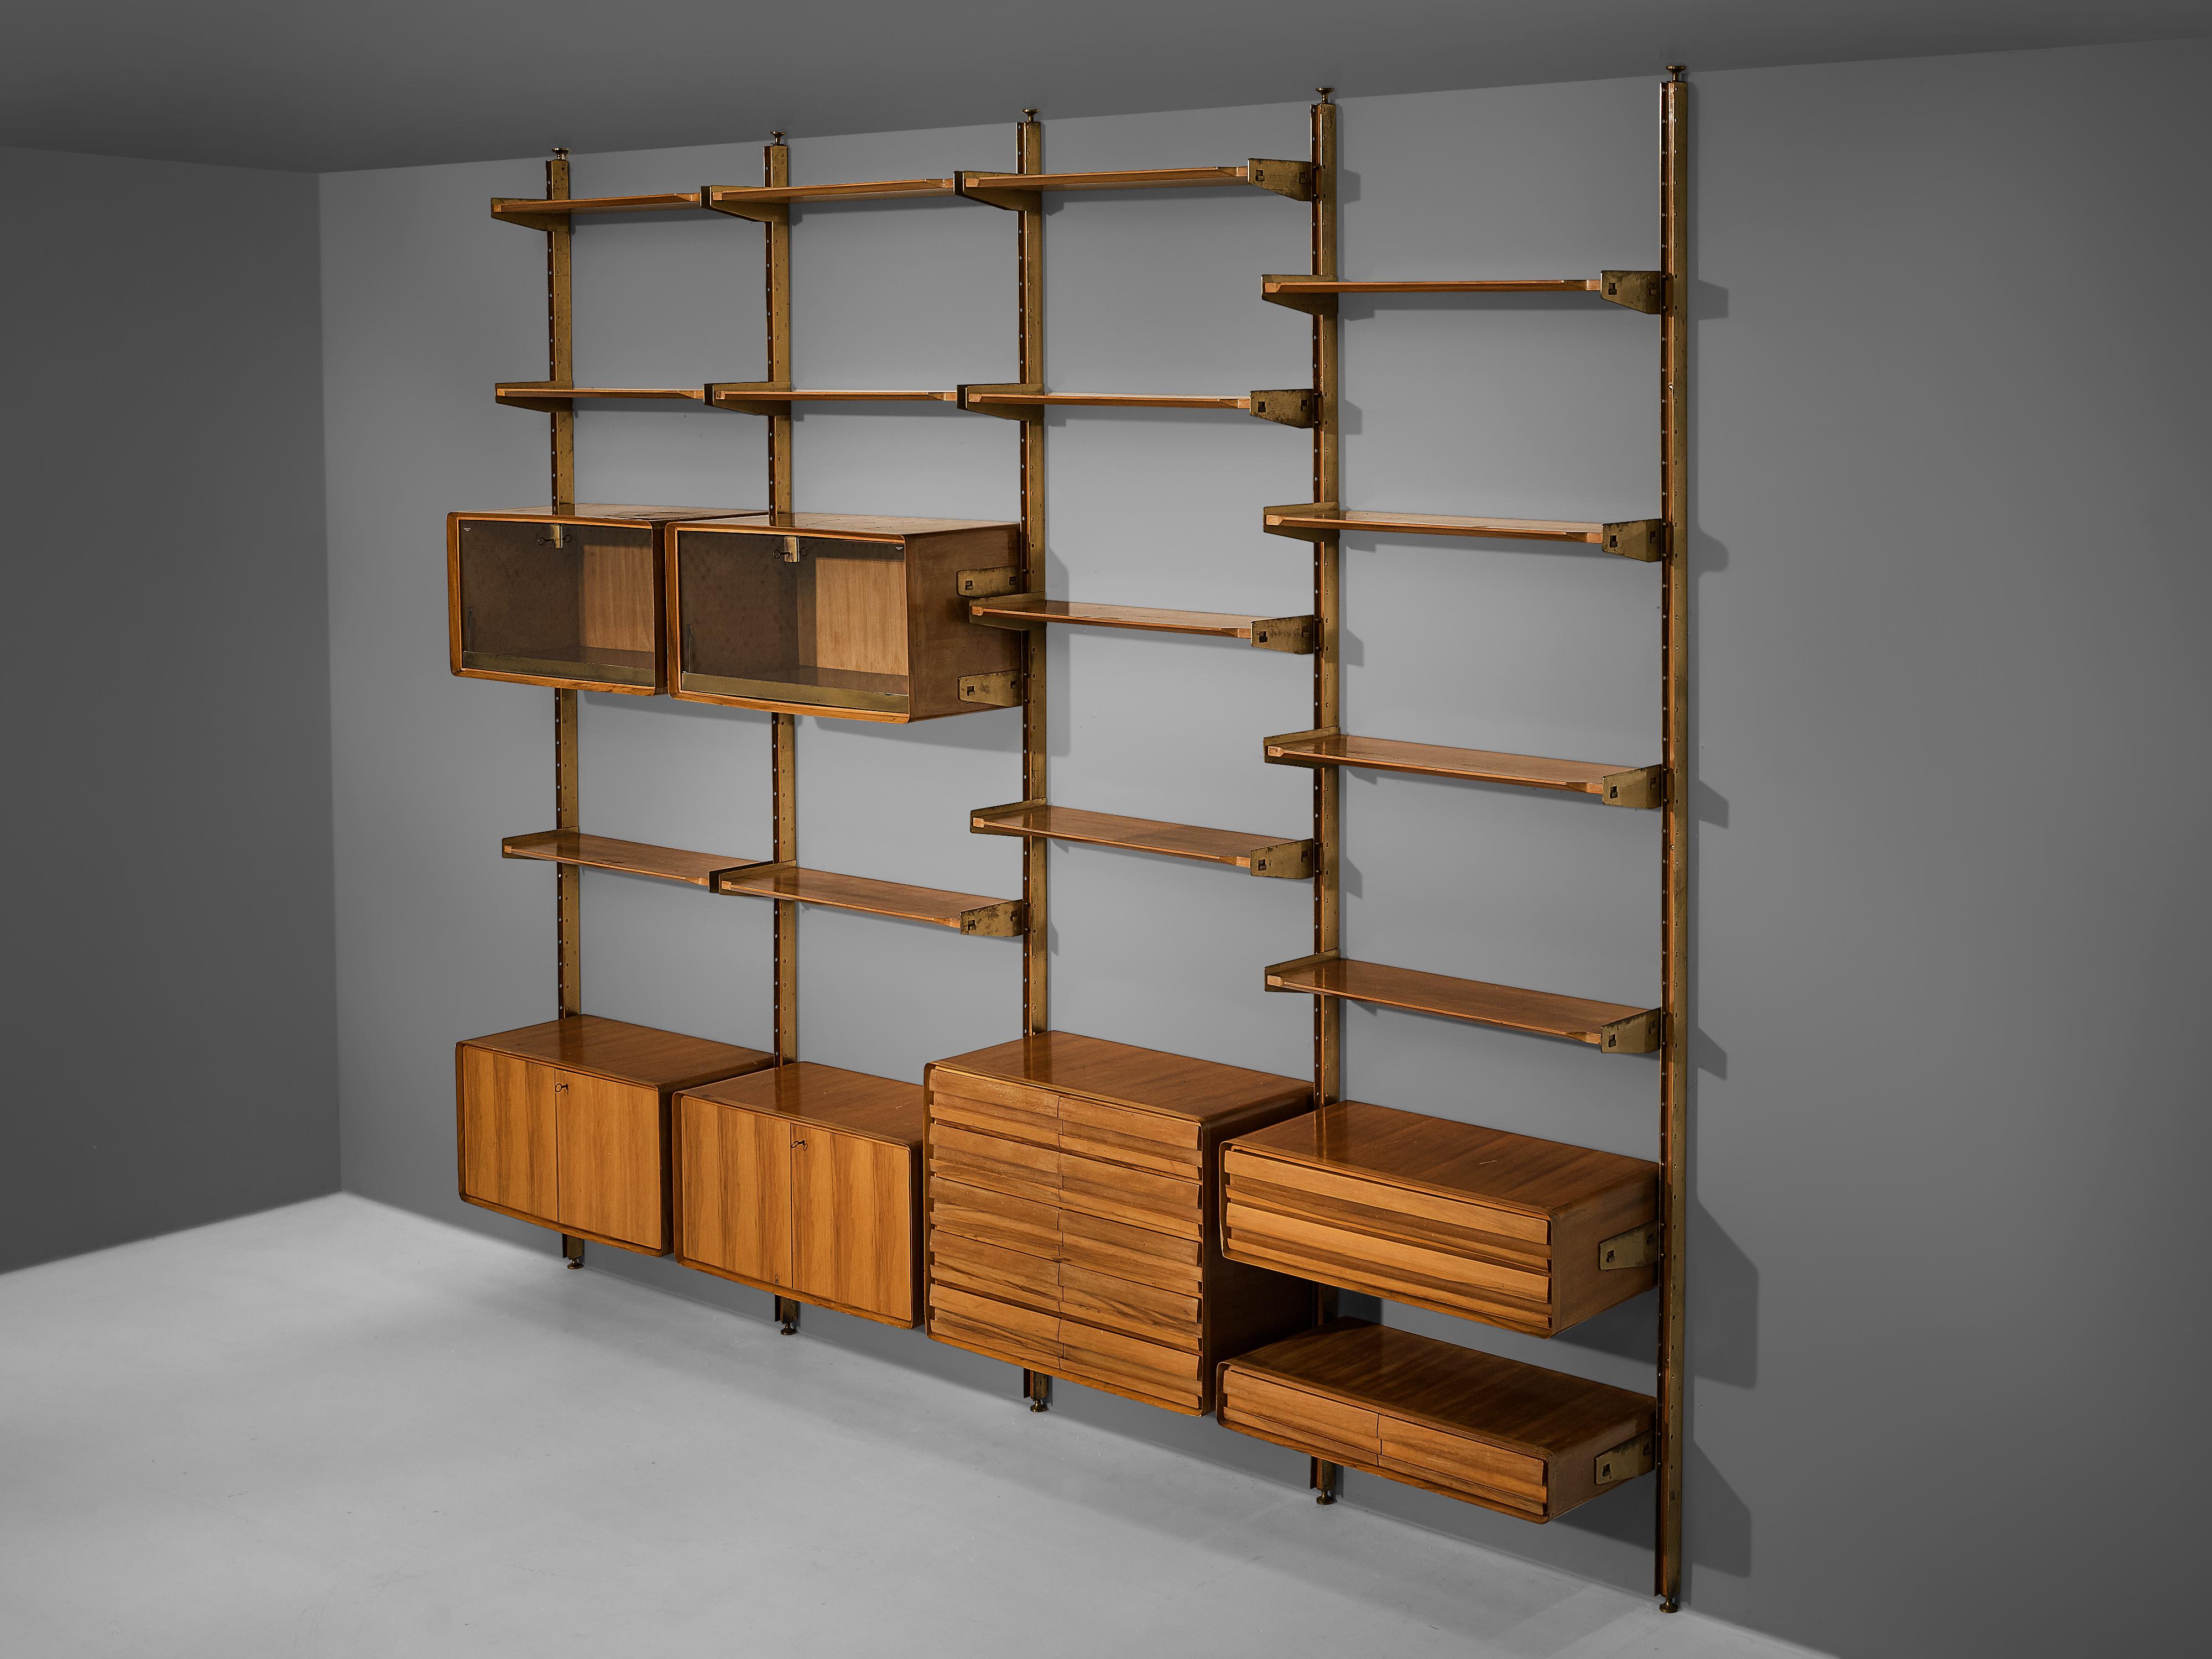 Wall unit, walnut, brass, glass, Italy, 1950s

Admirable Italian wall unit with four columns and diverse storage systems. Multiple shelves are attached to the brass wall fixture by polygonal sides. The shelves and all seven compartments can be